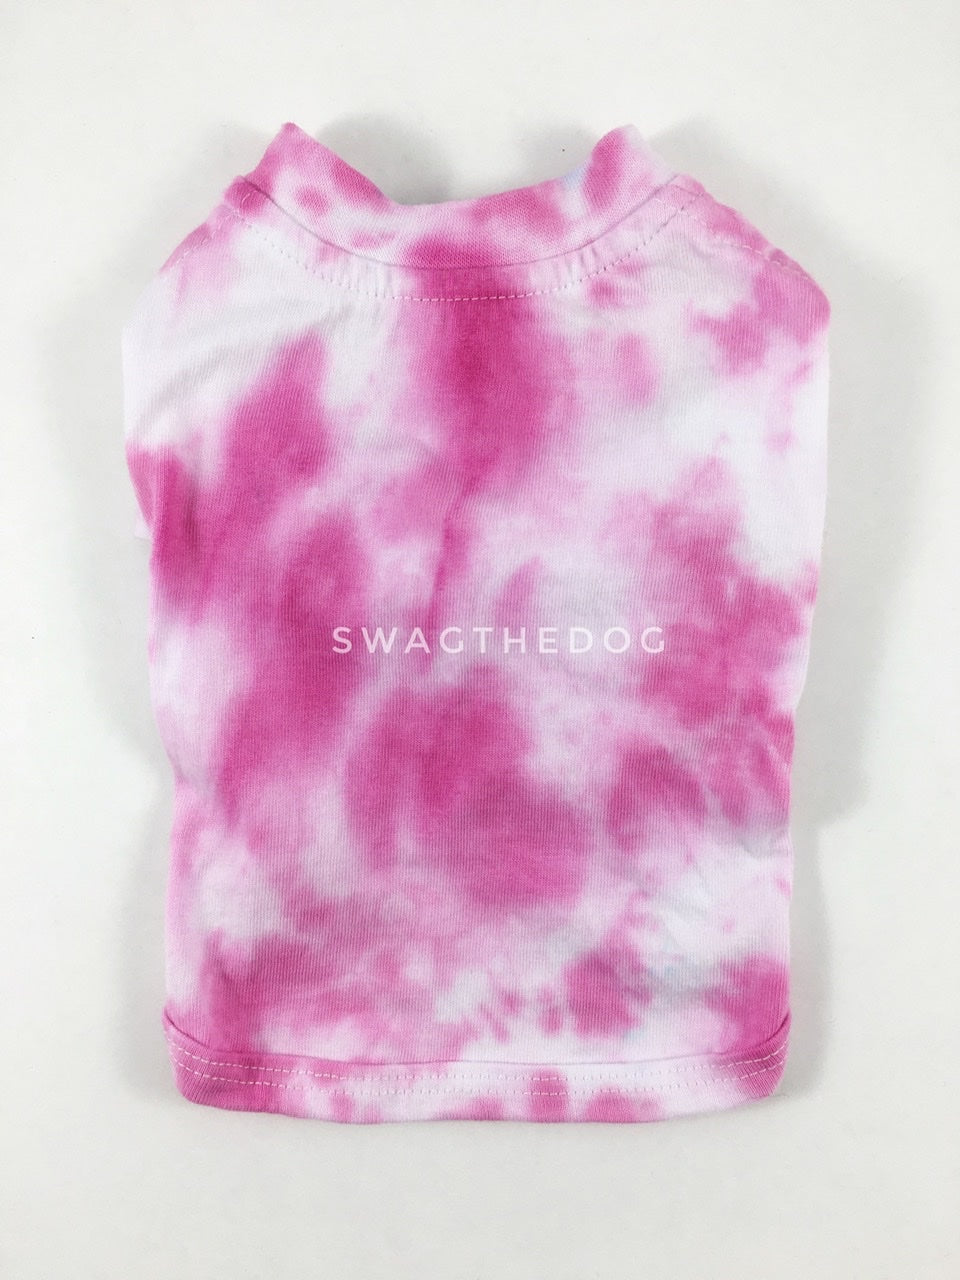 Swagadelic Pink Tie Dye Tee - Product back view. The hand tie-dyed tee with Pink